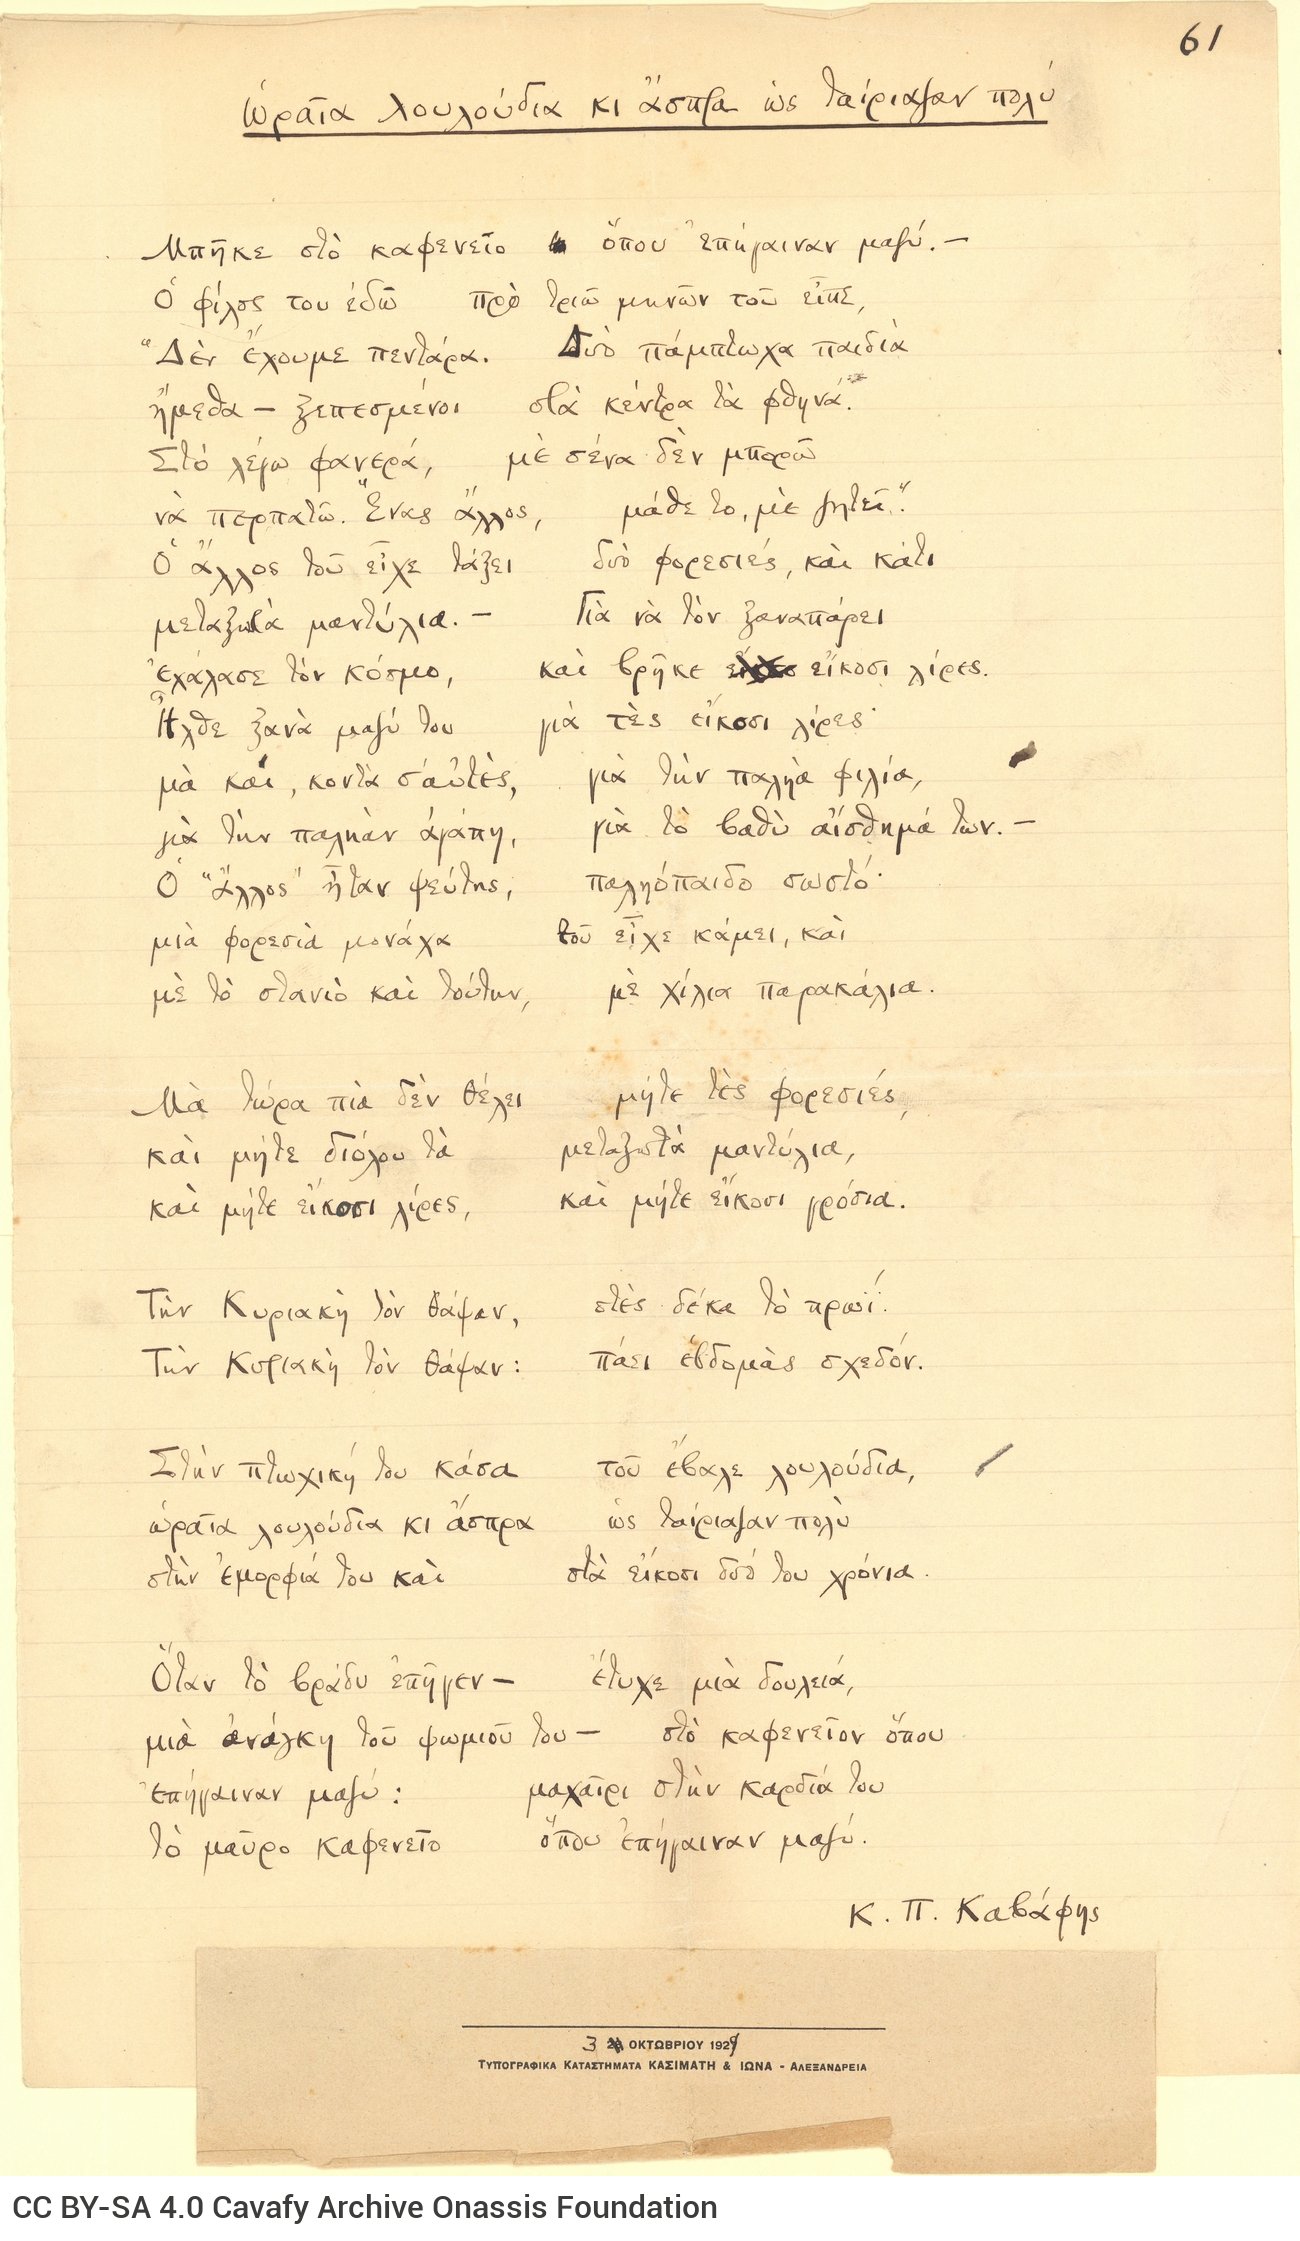 Autograph manuscript of the poem "Beautiful, White Flowers As They Went So Well" on one side of a ruled sheet. Cancellatio